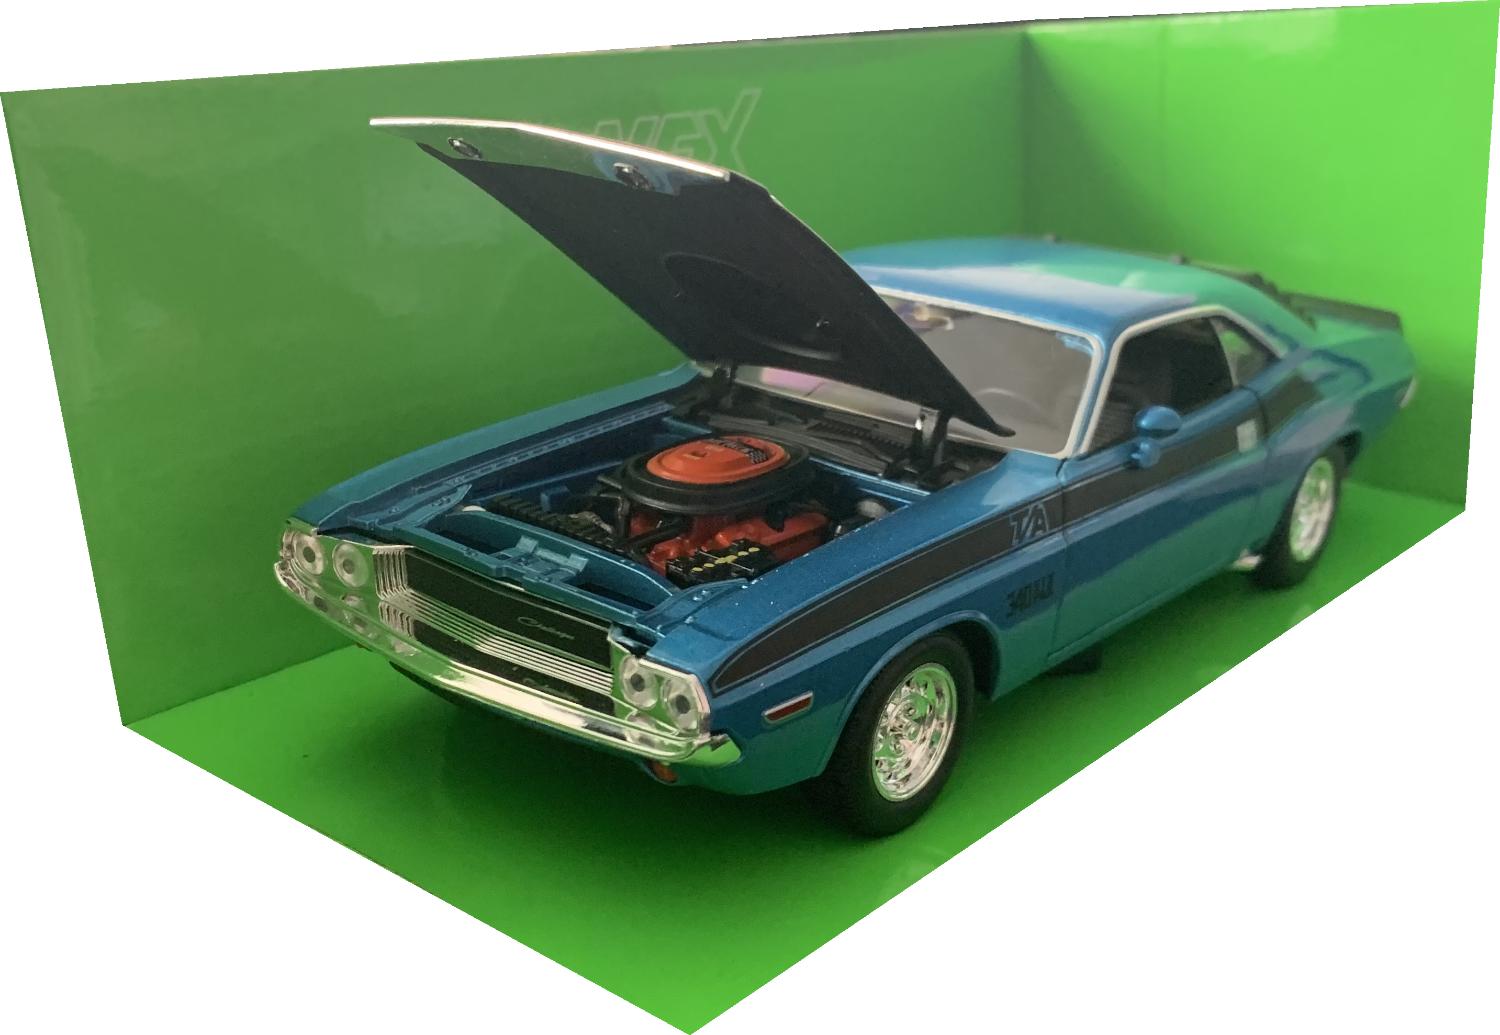 An excellent production of the Dodge Challenger T/A with high level of detail throughout, all authentically recreated. Model is mounted on a removable plinth and presented in a window display box. The car is approx. 19½ cm long and the presentation box is 24 cm long